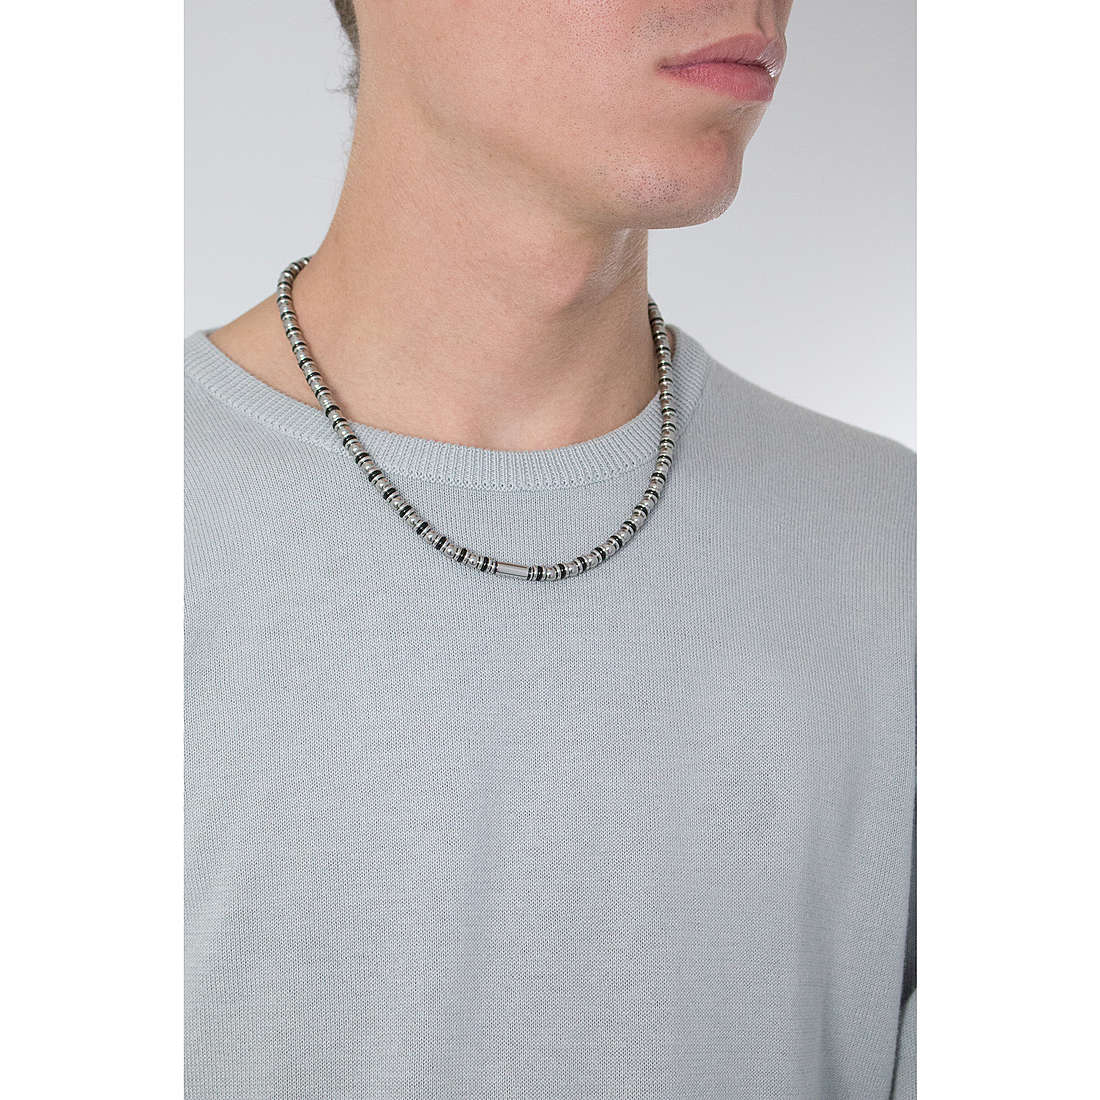 2Jewels necklaces Domino man 251451 wearing